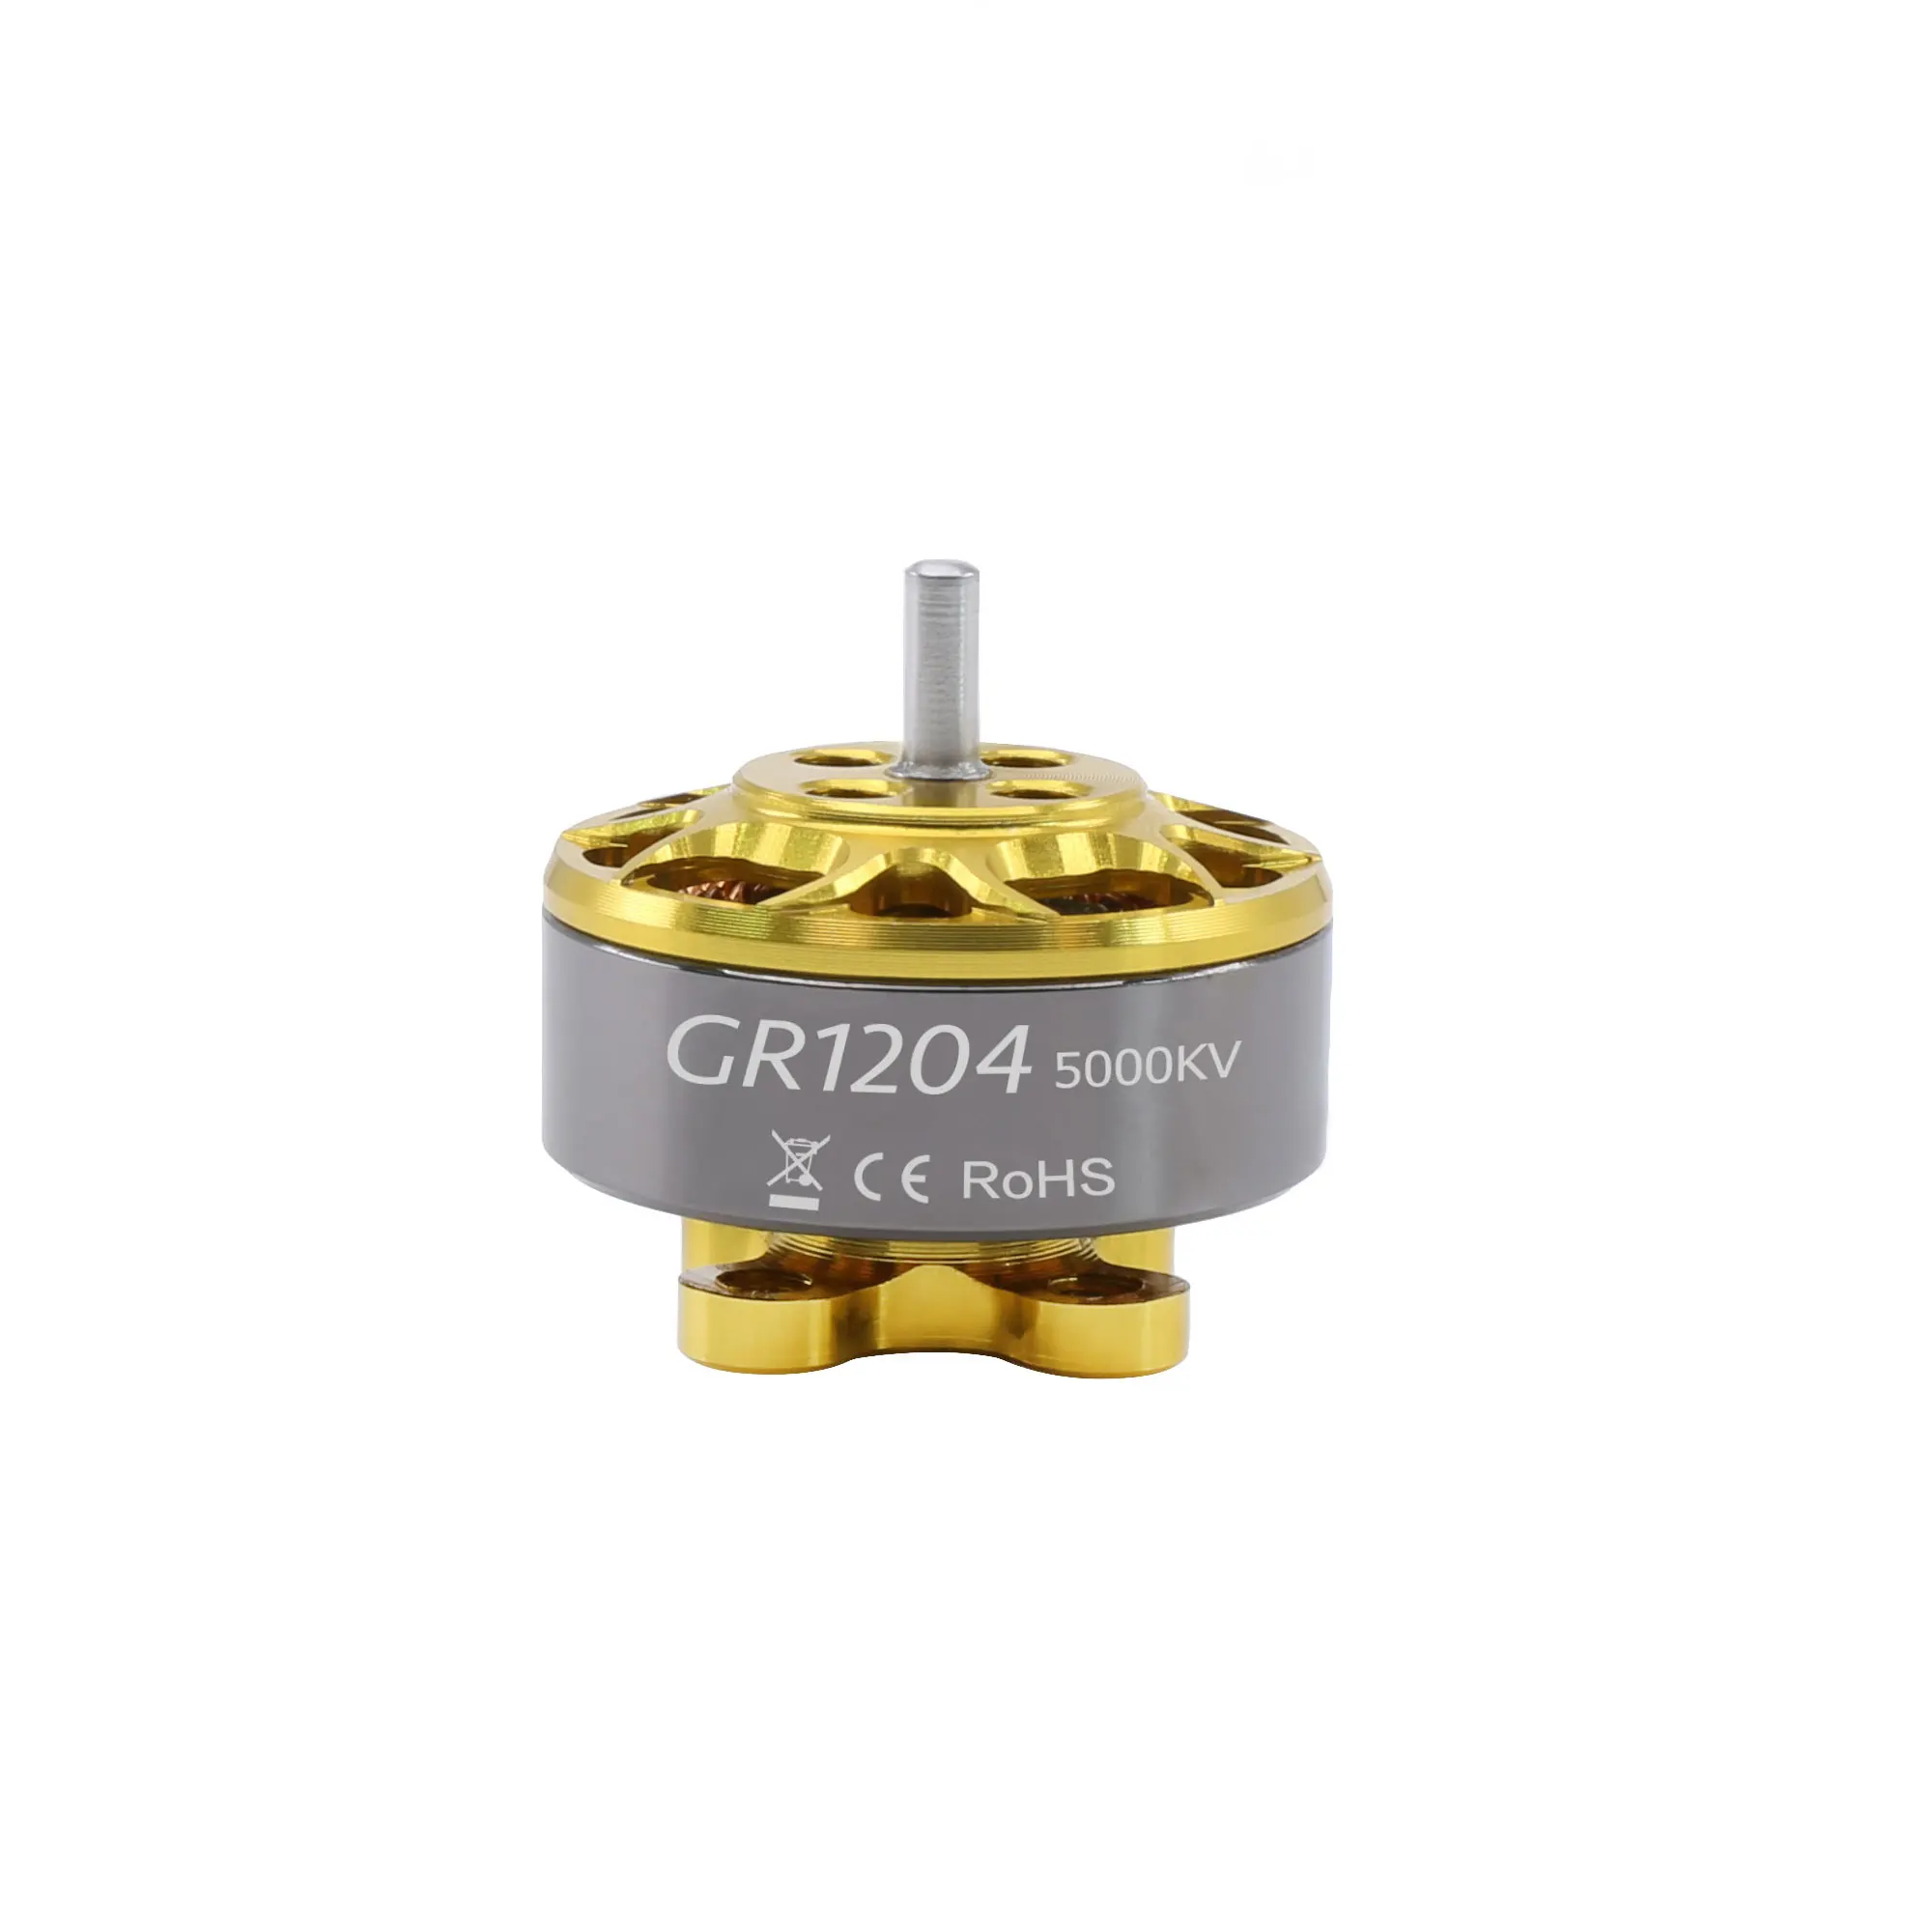 GEPRC GR1204 3750KV 5000KV brushless motor for 105-110mm Whoop Drone and Toothpick Drone High efficiency and smooth images - 6